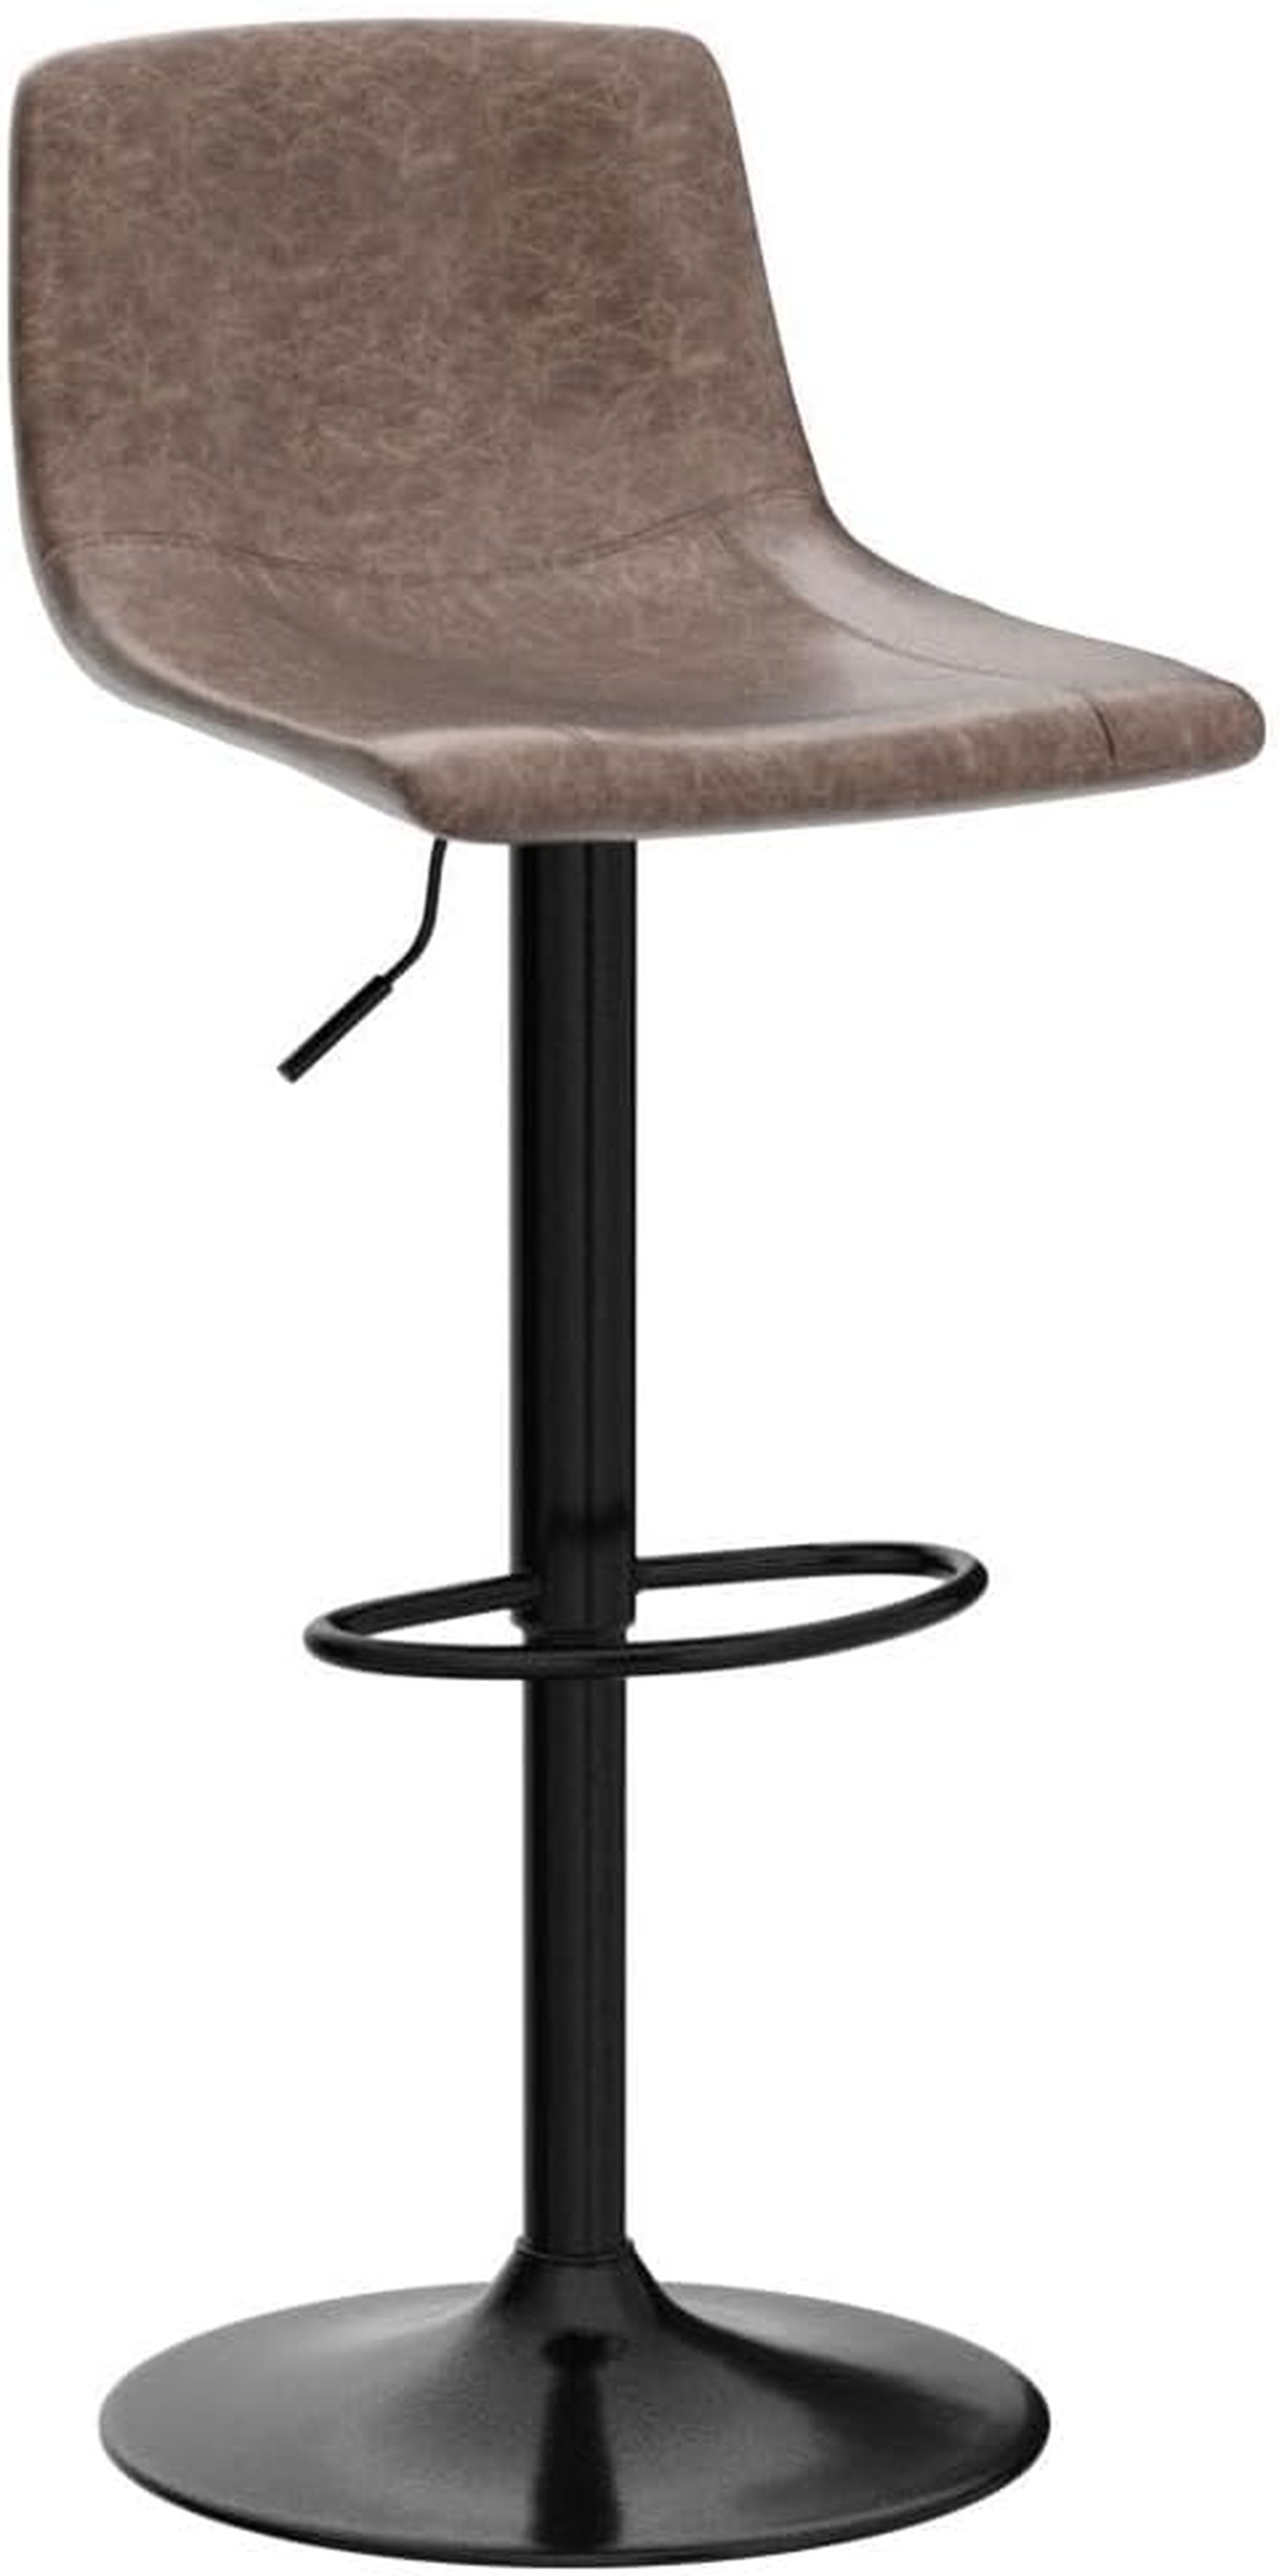 Yaheetech BarStools Modern Design Bar Stools Urban Industrial PU Leather Armless Chair Adjustable Height Swivel for Bar Counter Kitchen, Brown - CB2